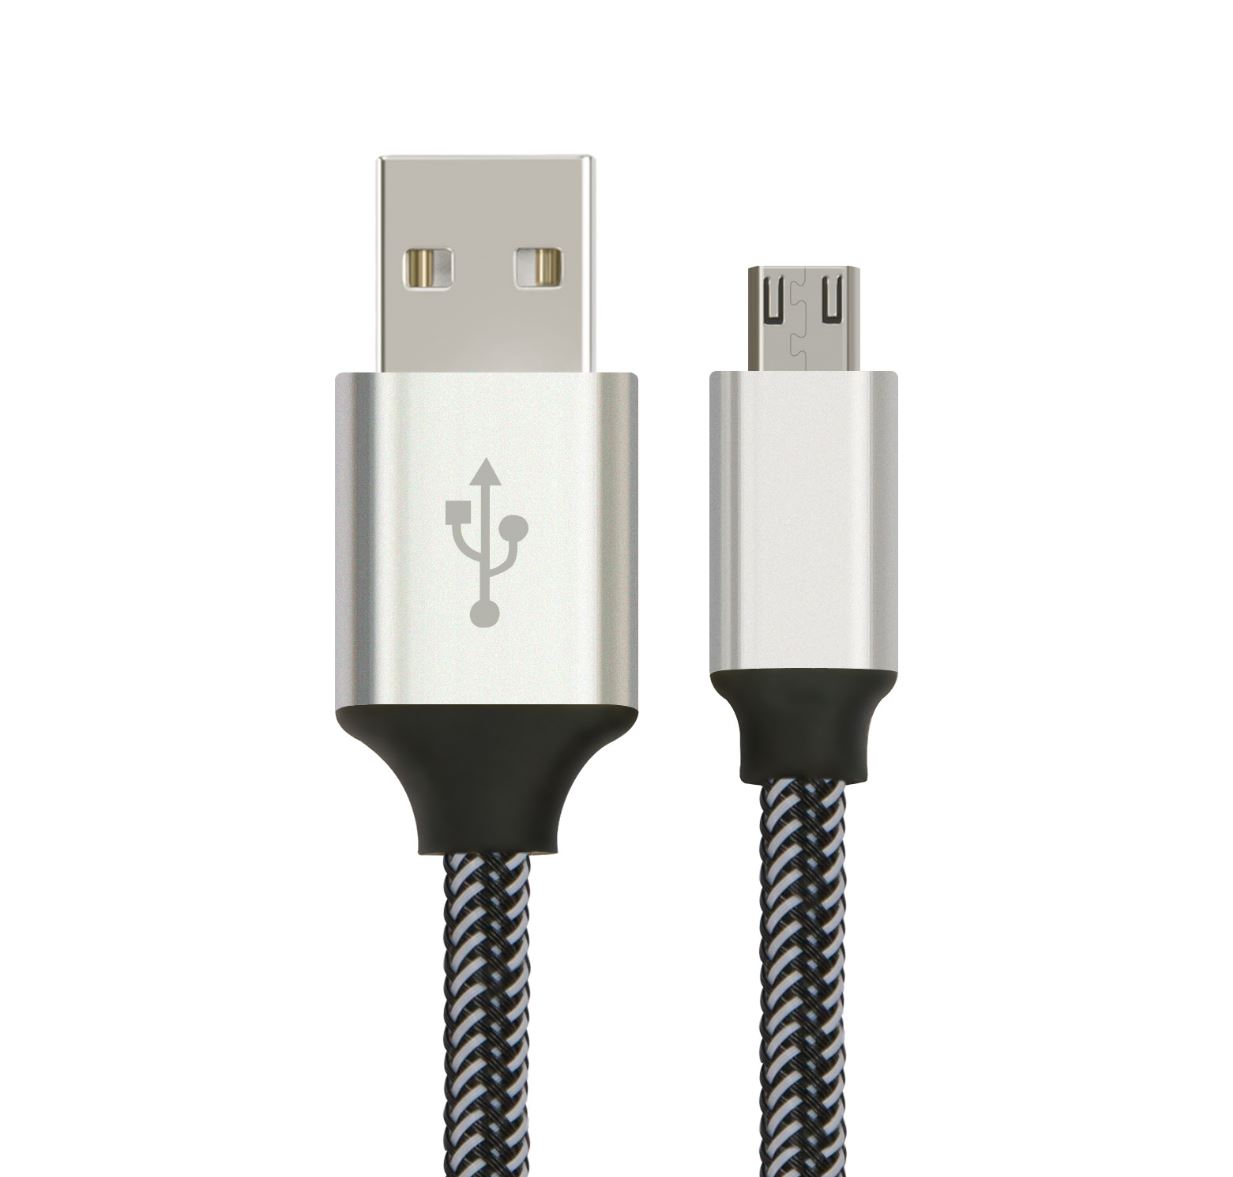 Cables/Astrotek: Astrotek, 1m, Micro, USB, Data, Sync, Charger, Cable, Cord, Silver, White, Color, for, Samsung, HTC, Motorola, Nokia, Kndle, Android, Phone, 